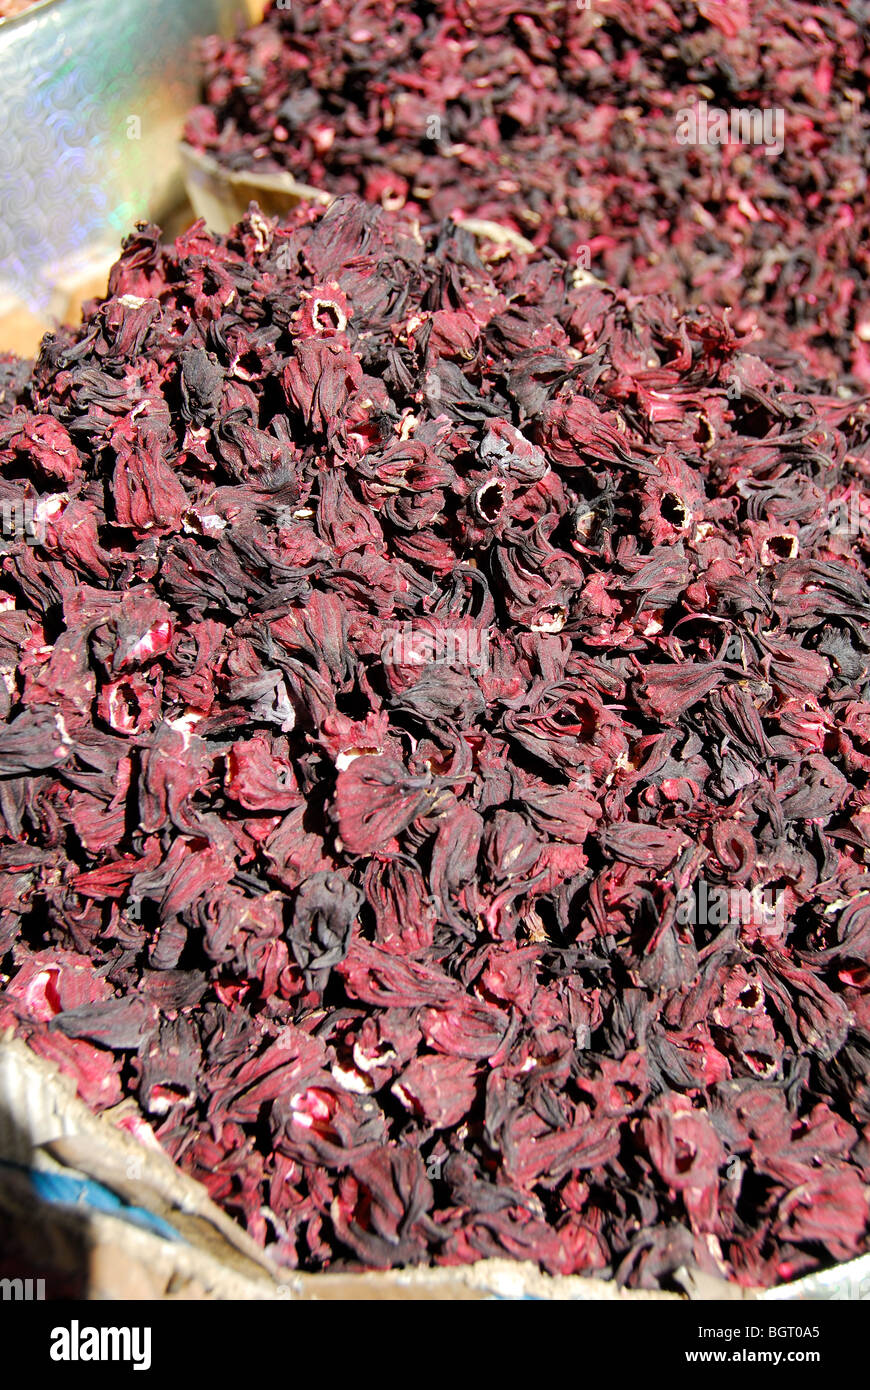 Dried Hibiscus flowers from Egypt